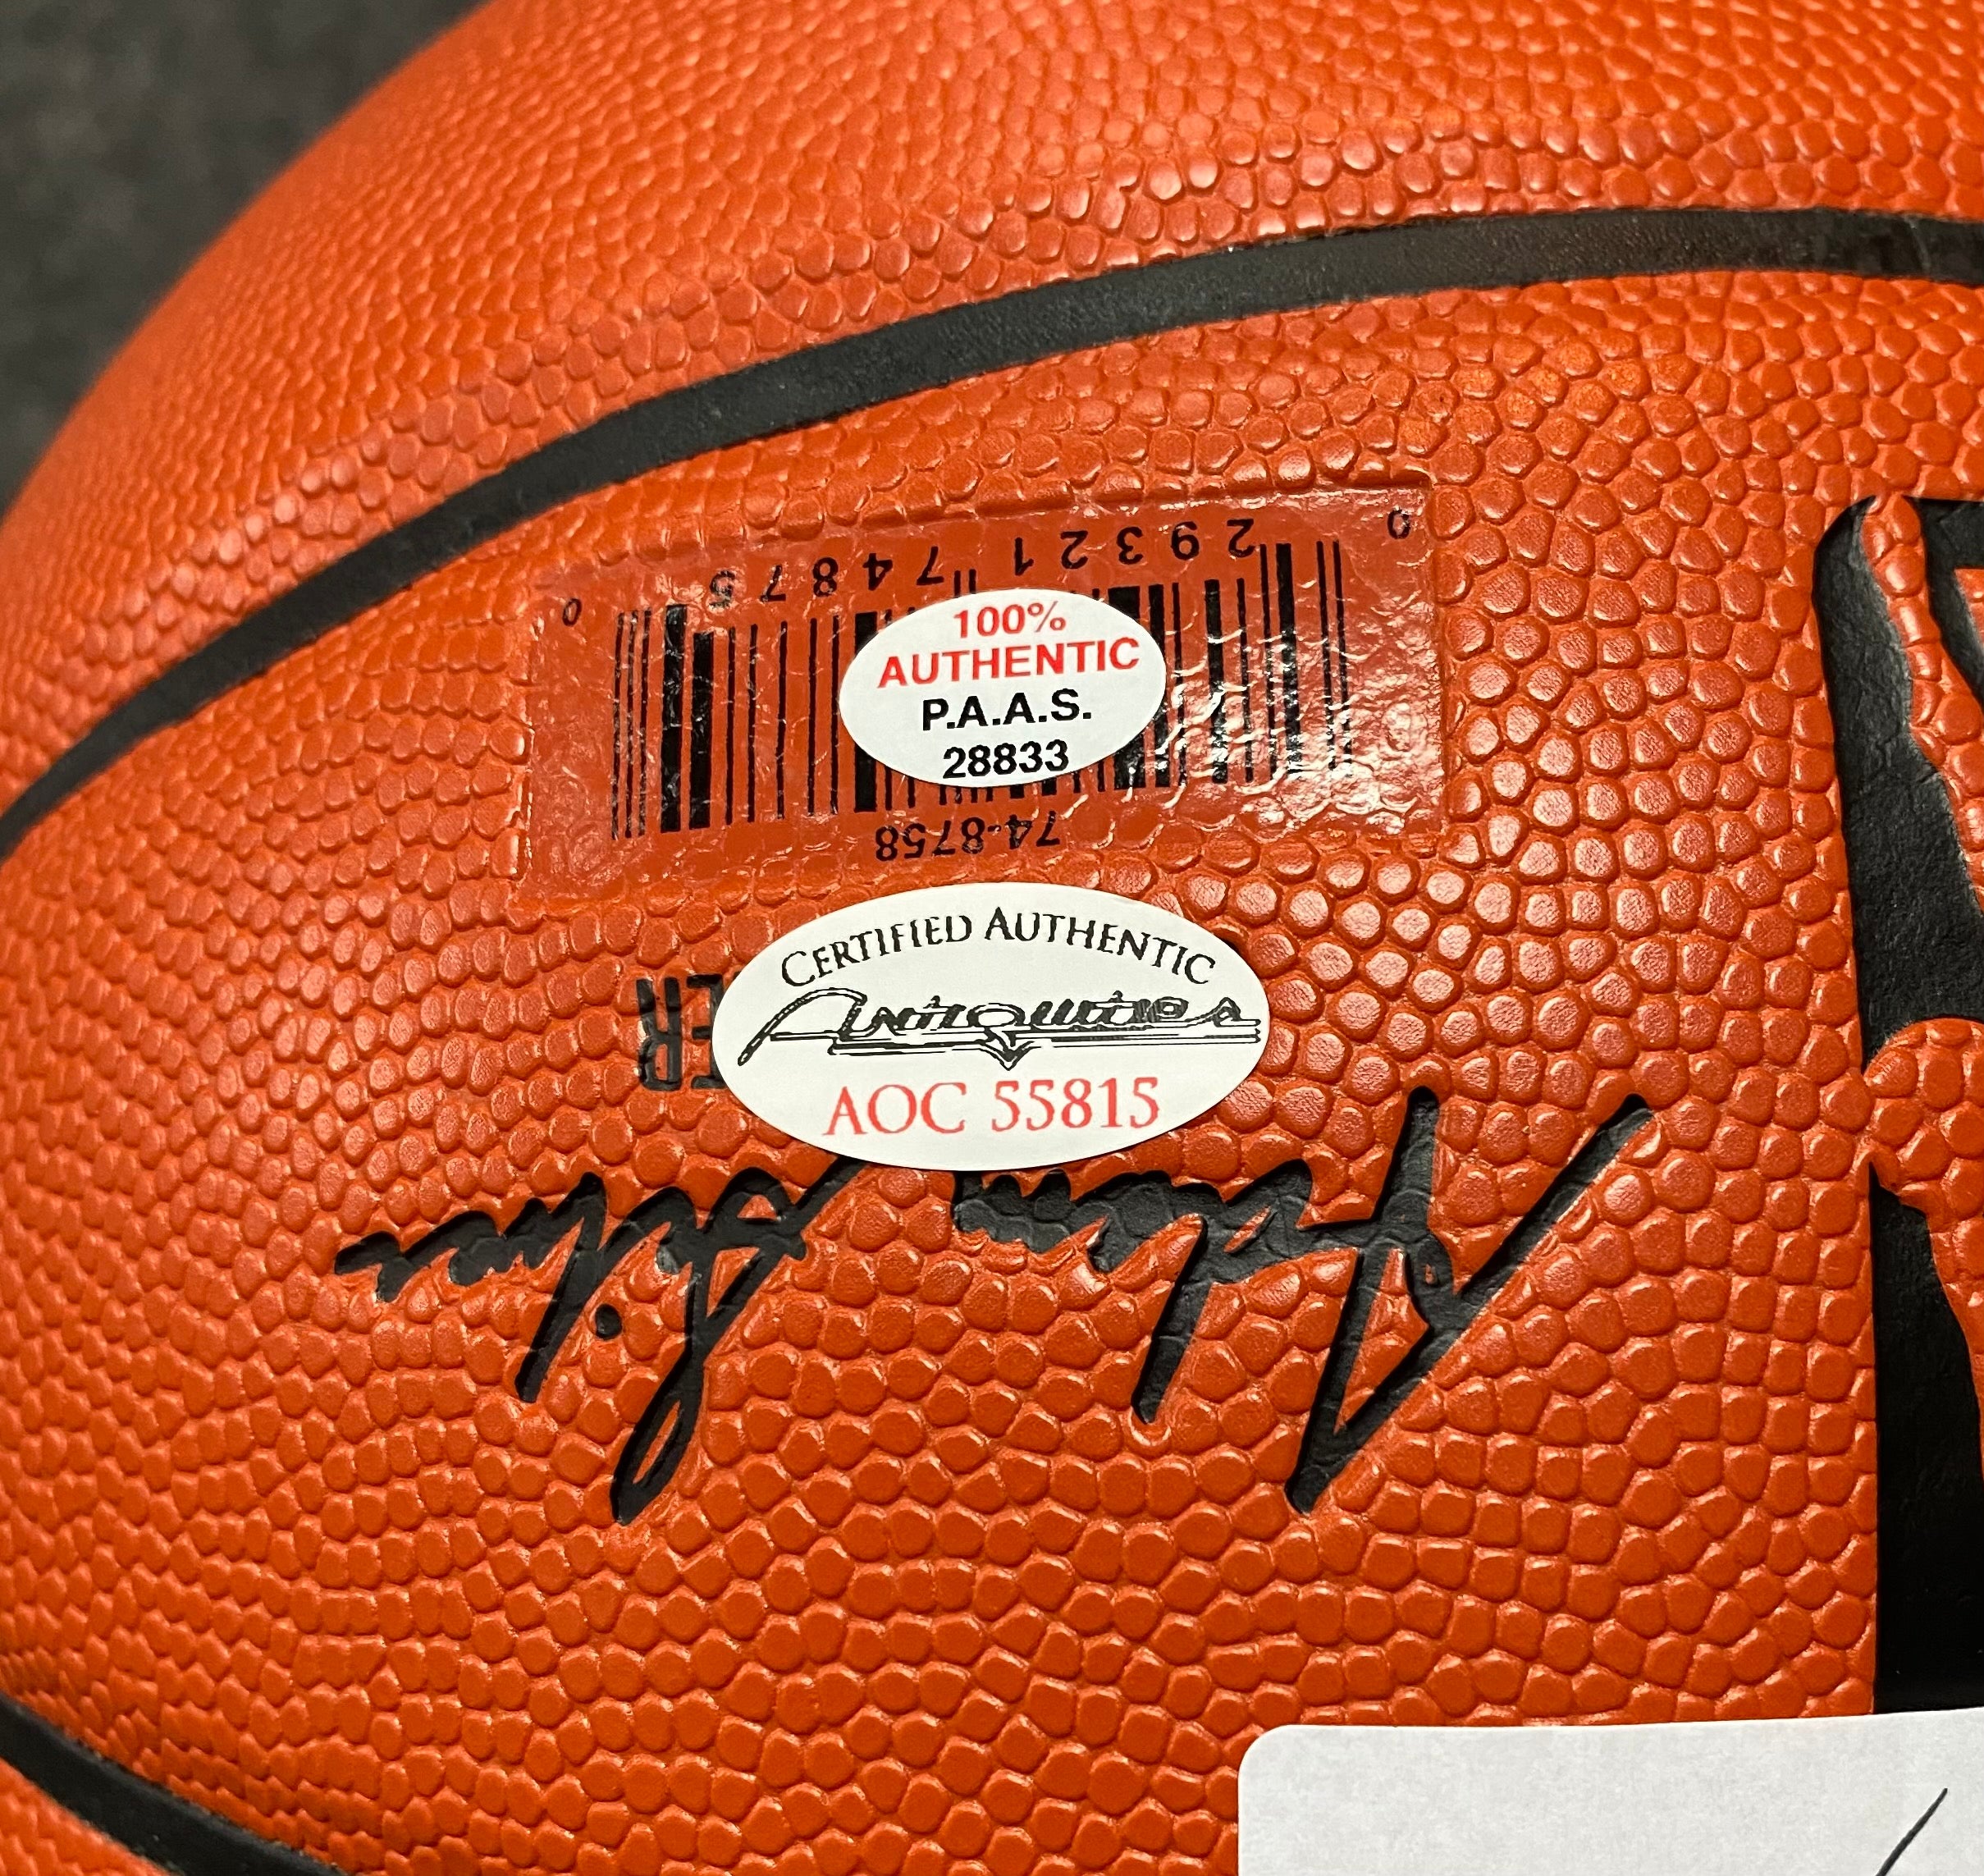 Stephen Curry Signed Spalding NBA Basketball